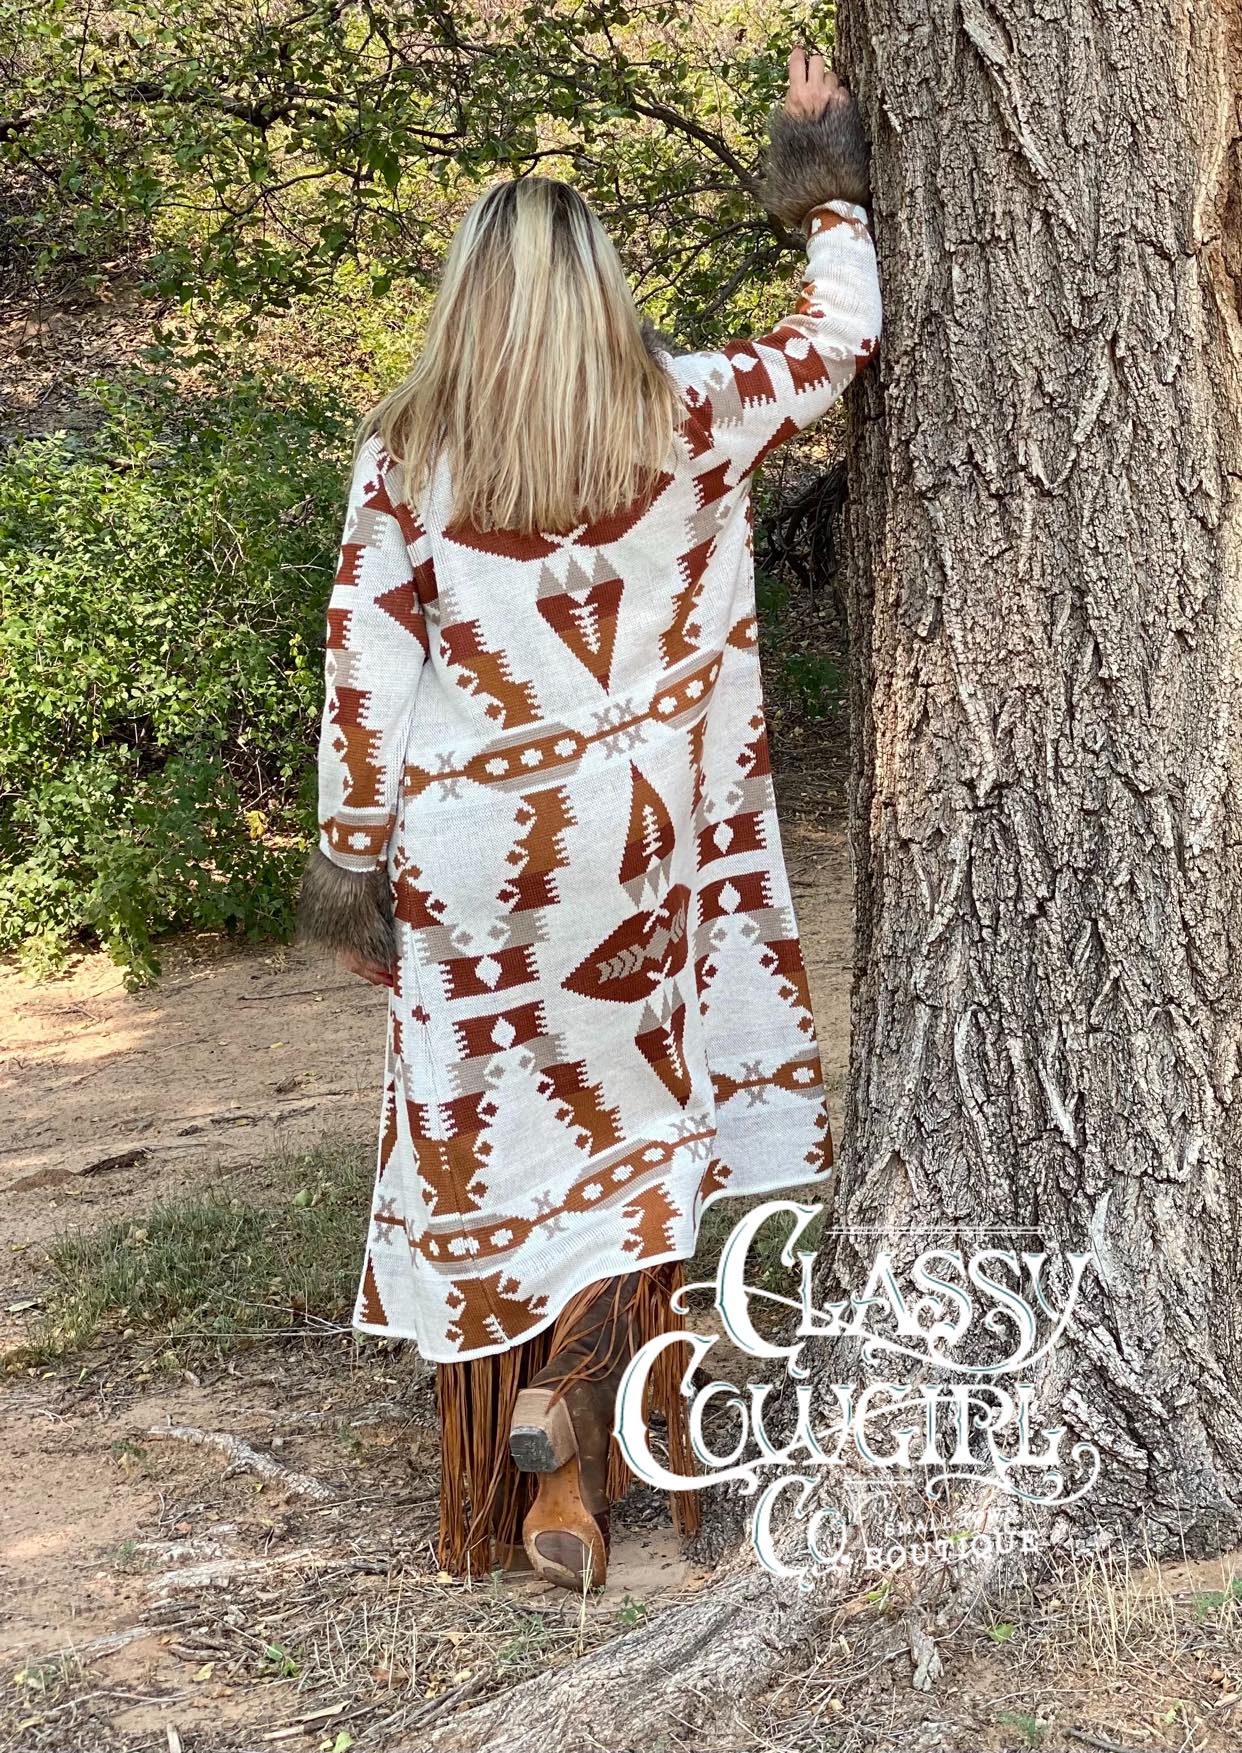 SALE- Classy Cowgirl Cream Sweater Duster with Fur (Small Only)